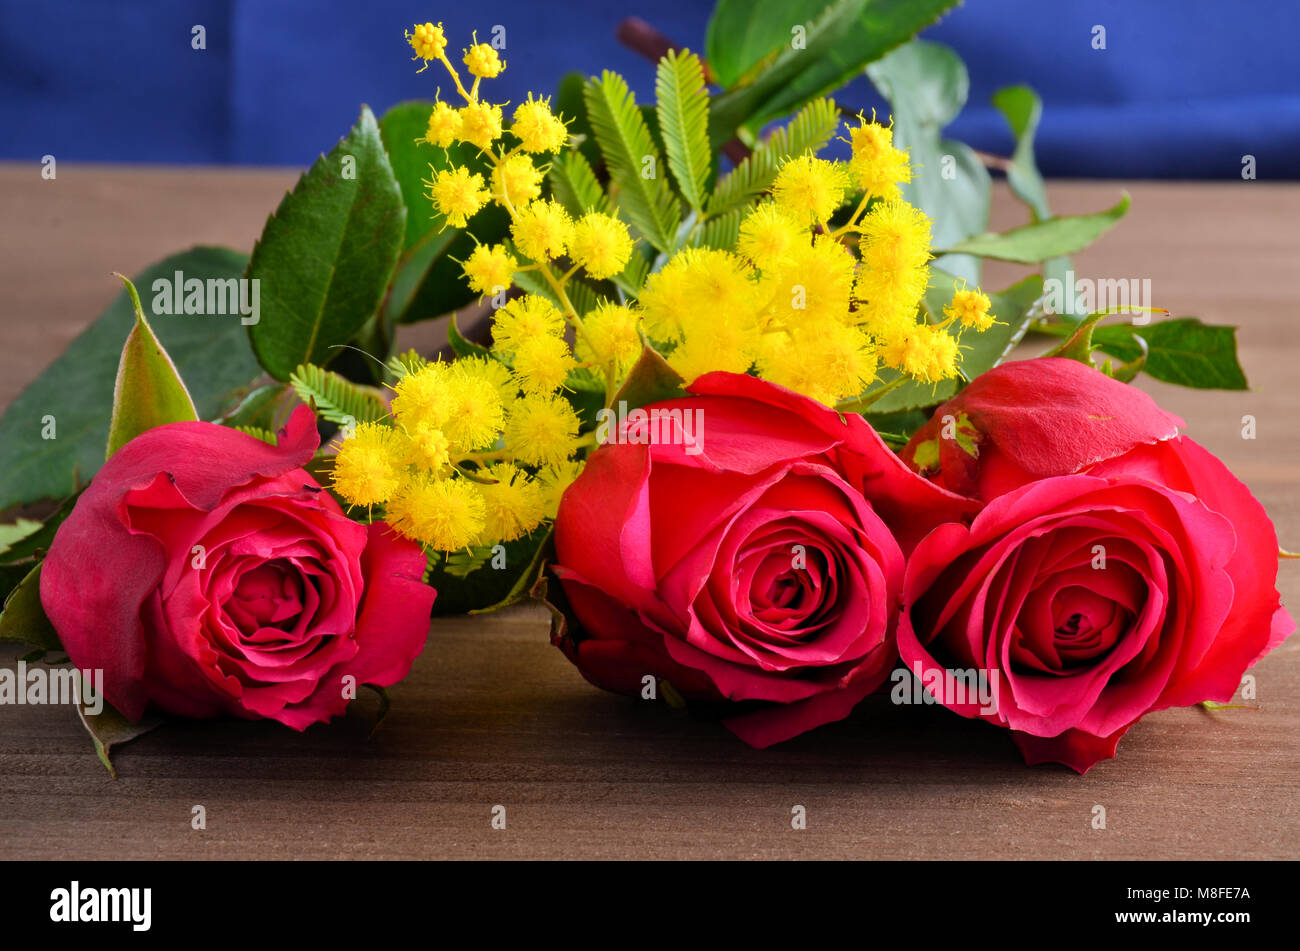 Three red roses against a brown background with yellow mimosa Stock Photo -  Alamy